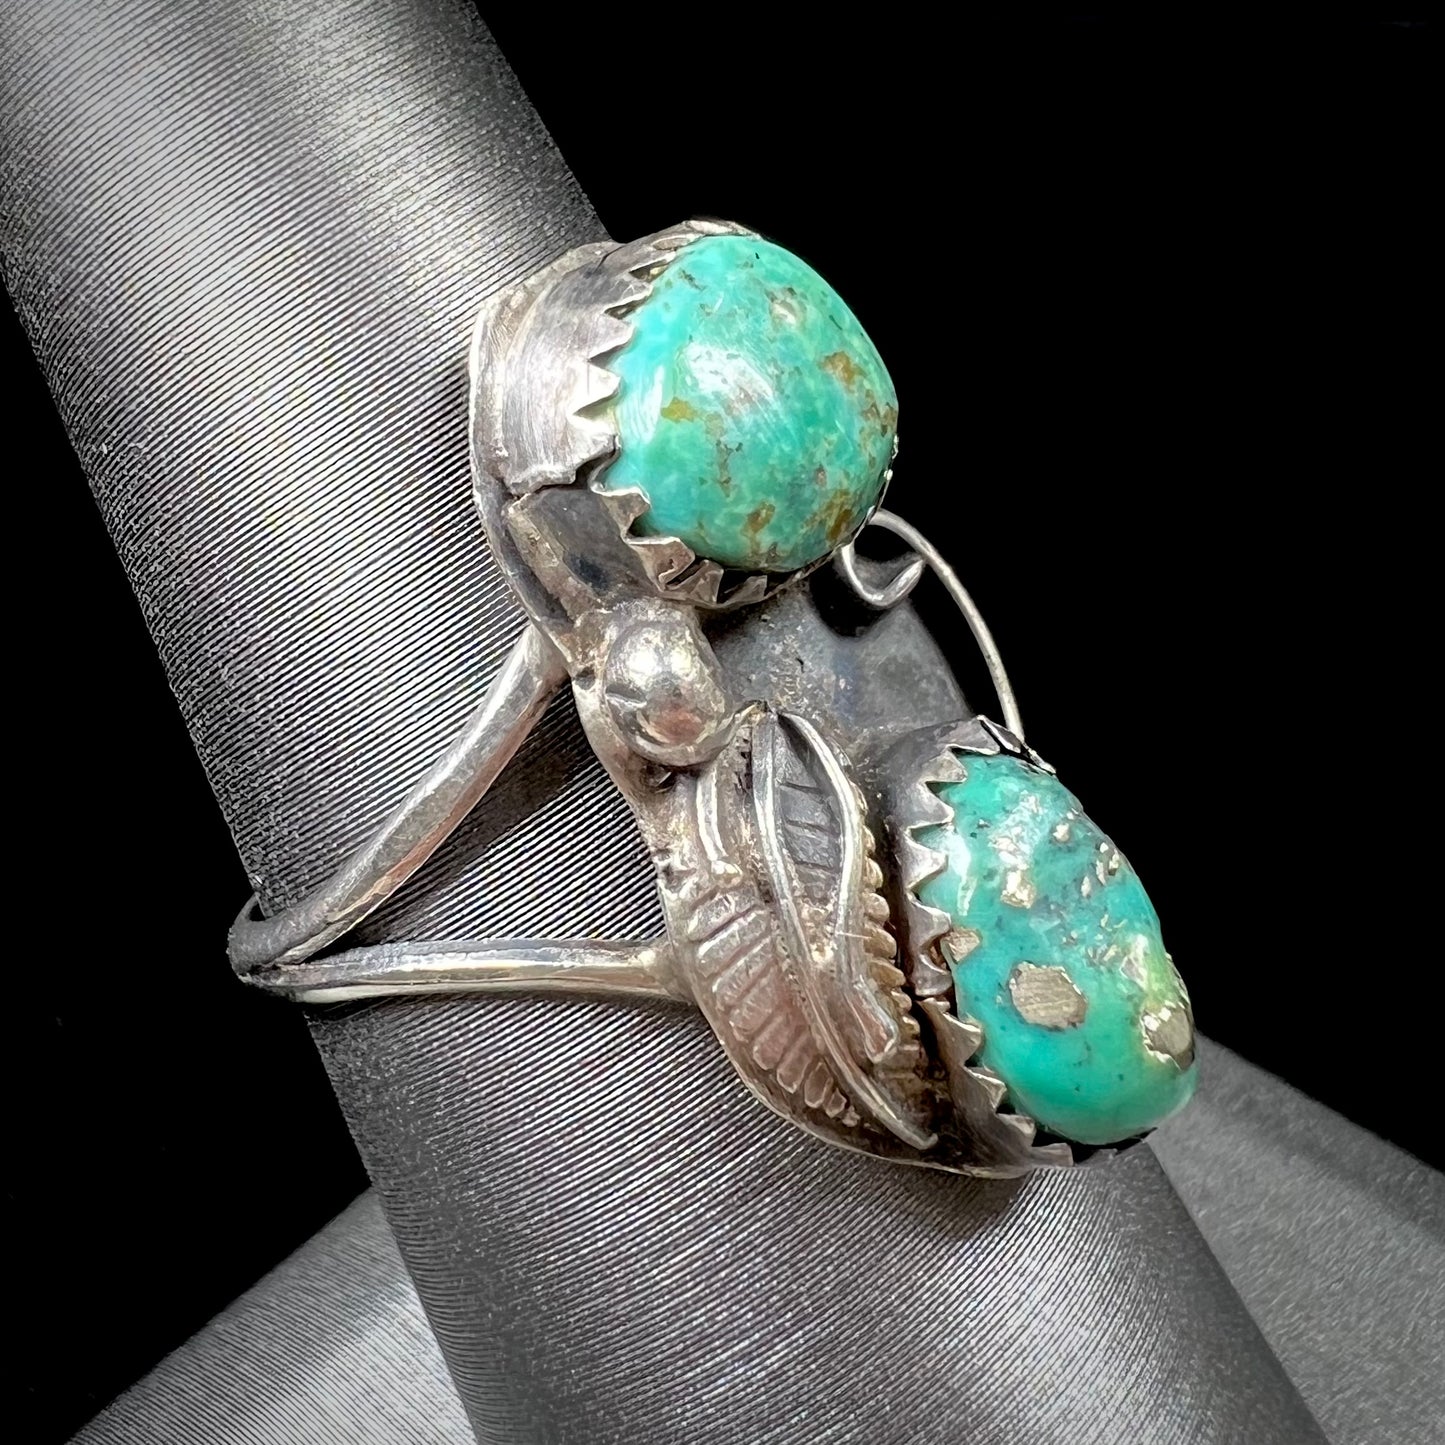 A ladies' sterling silver and green Morenci turquoise ring.  The ring is handmade in the Navajo style.